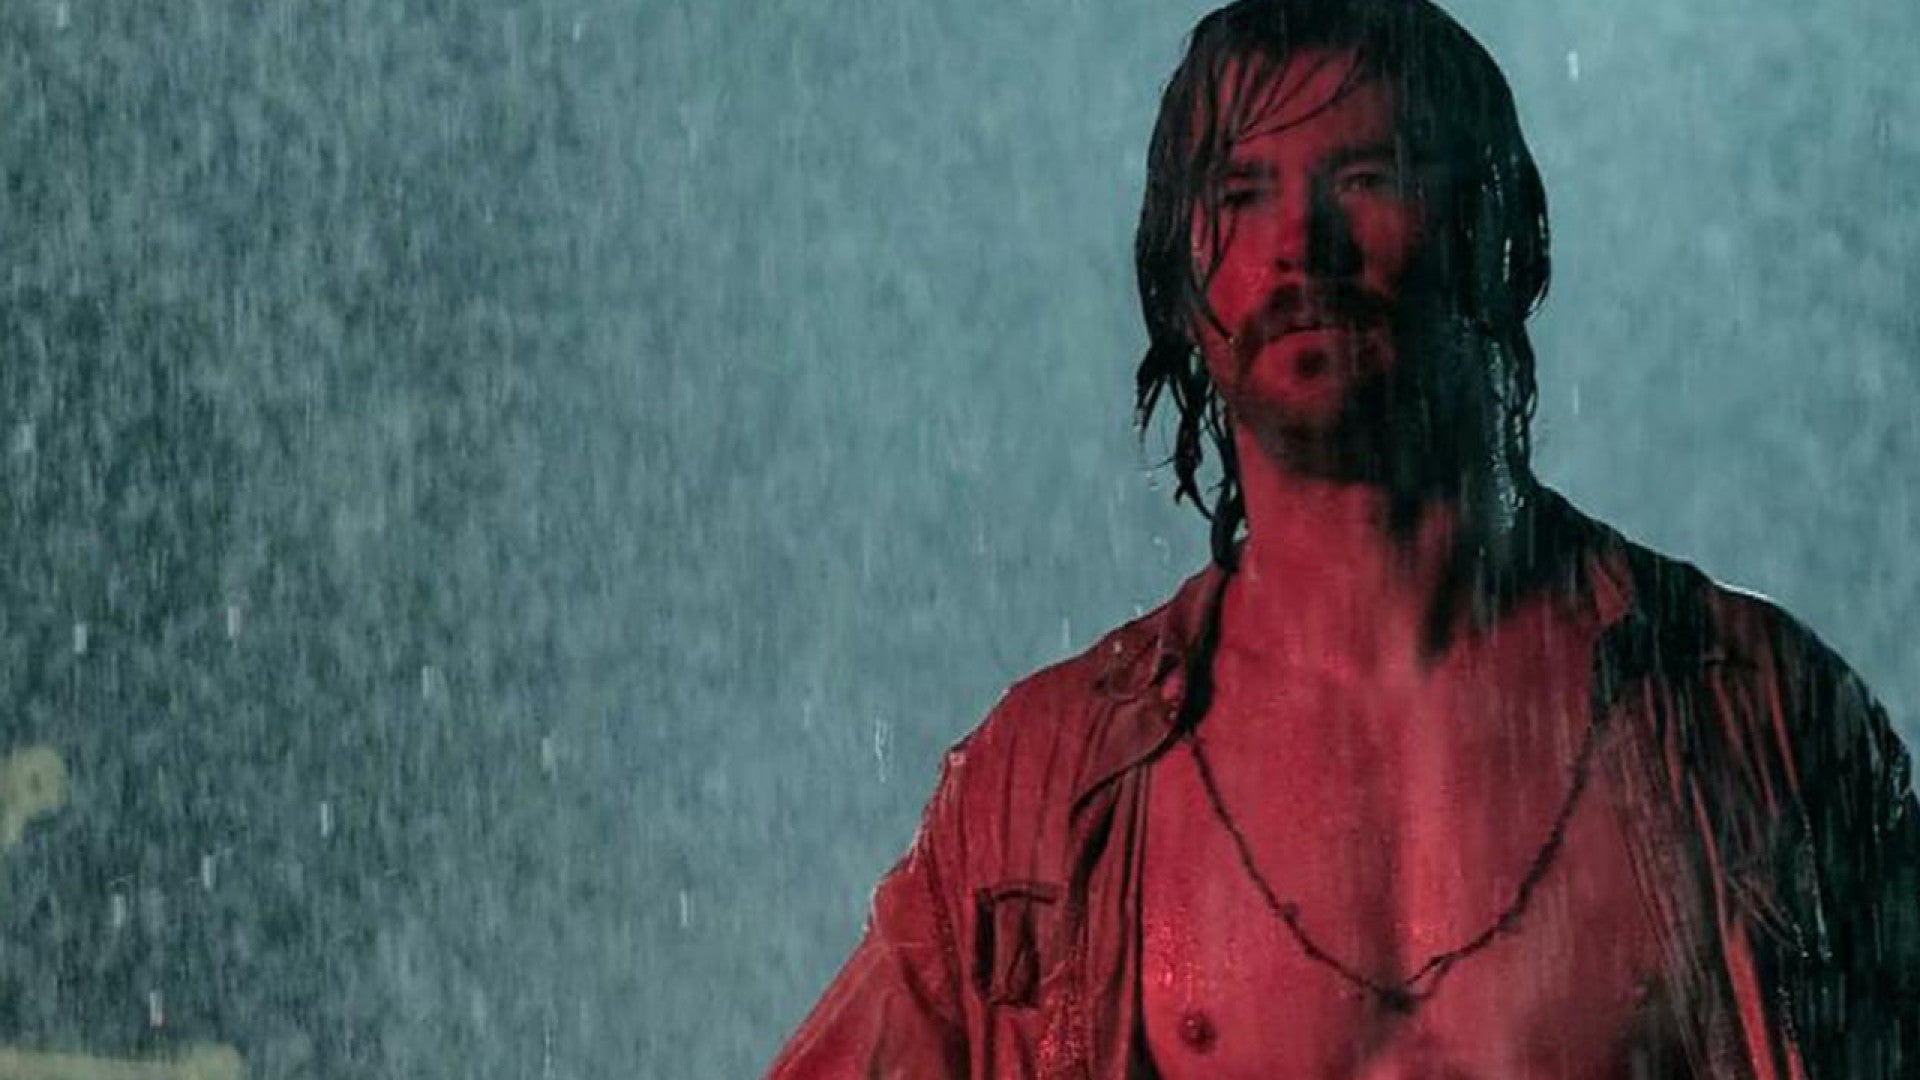 Chris Hemsworth In Bad Times At The El Royale 2018 Movie Wallpapers